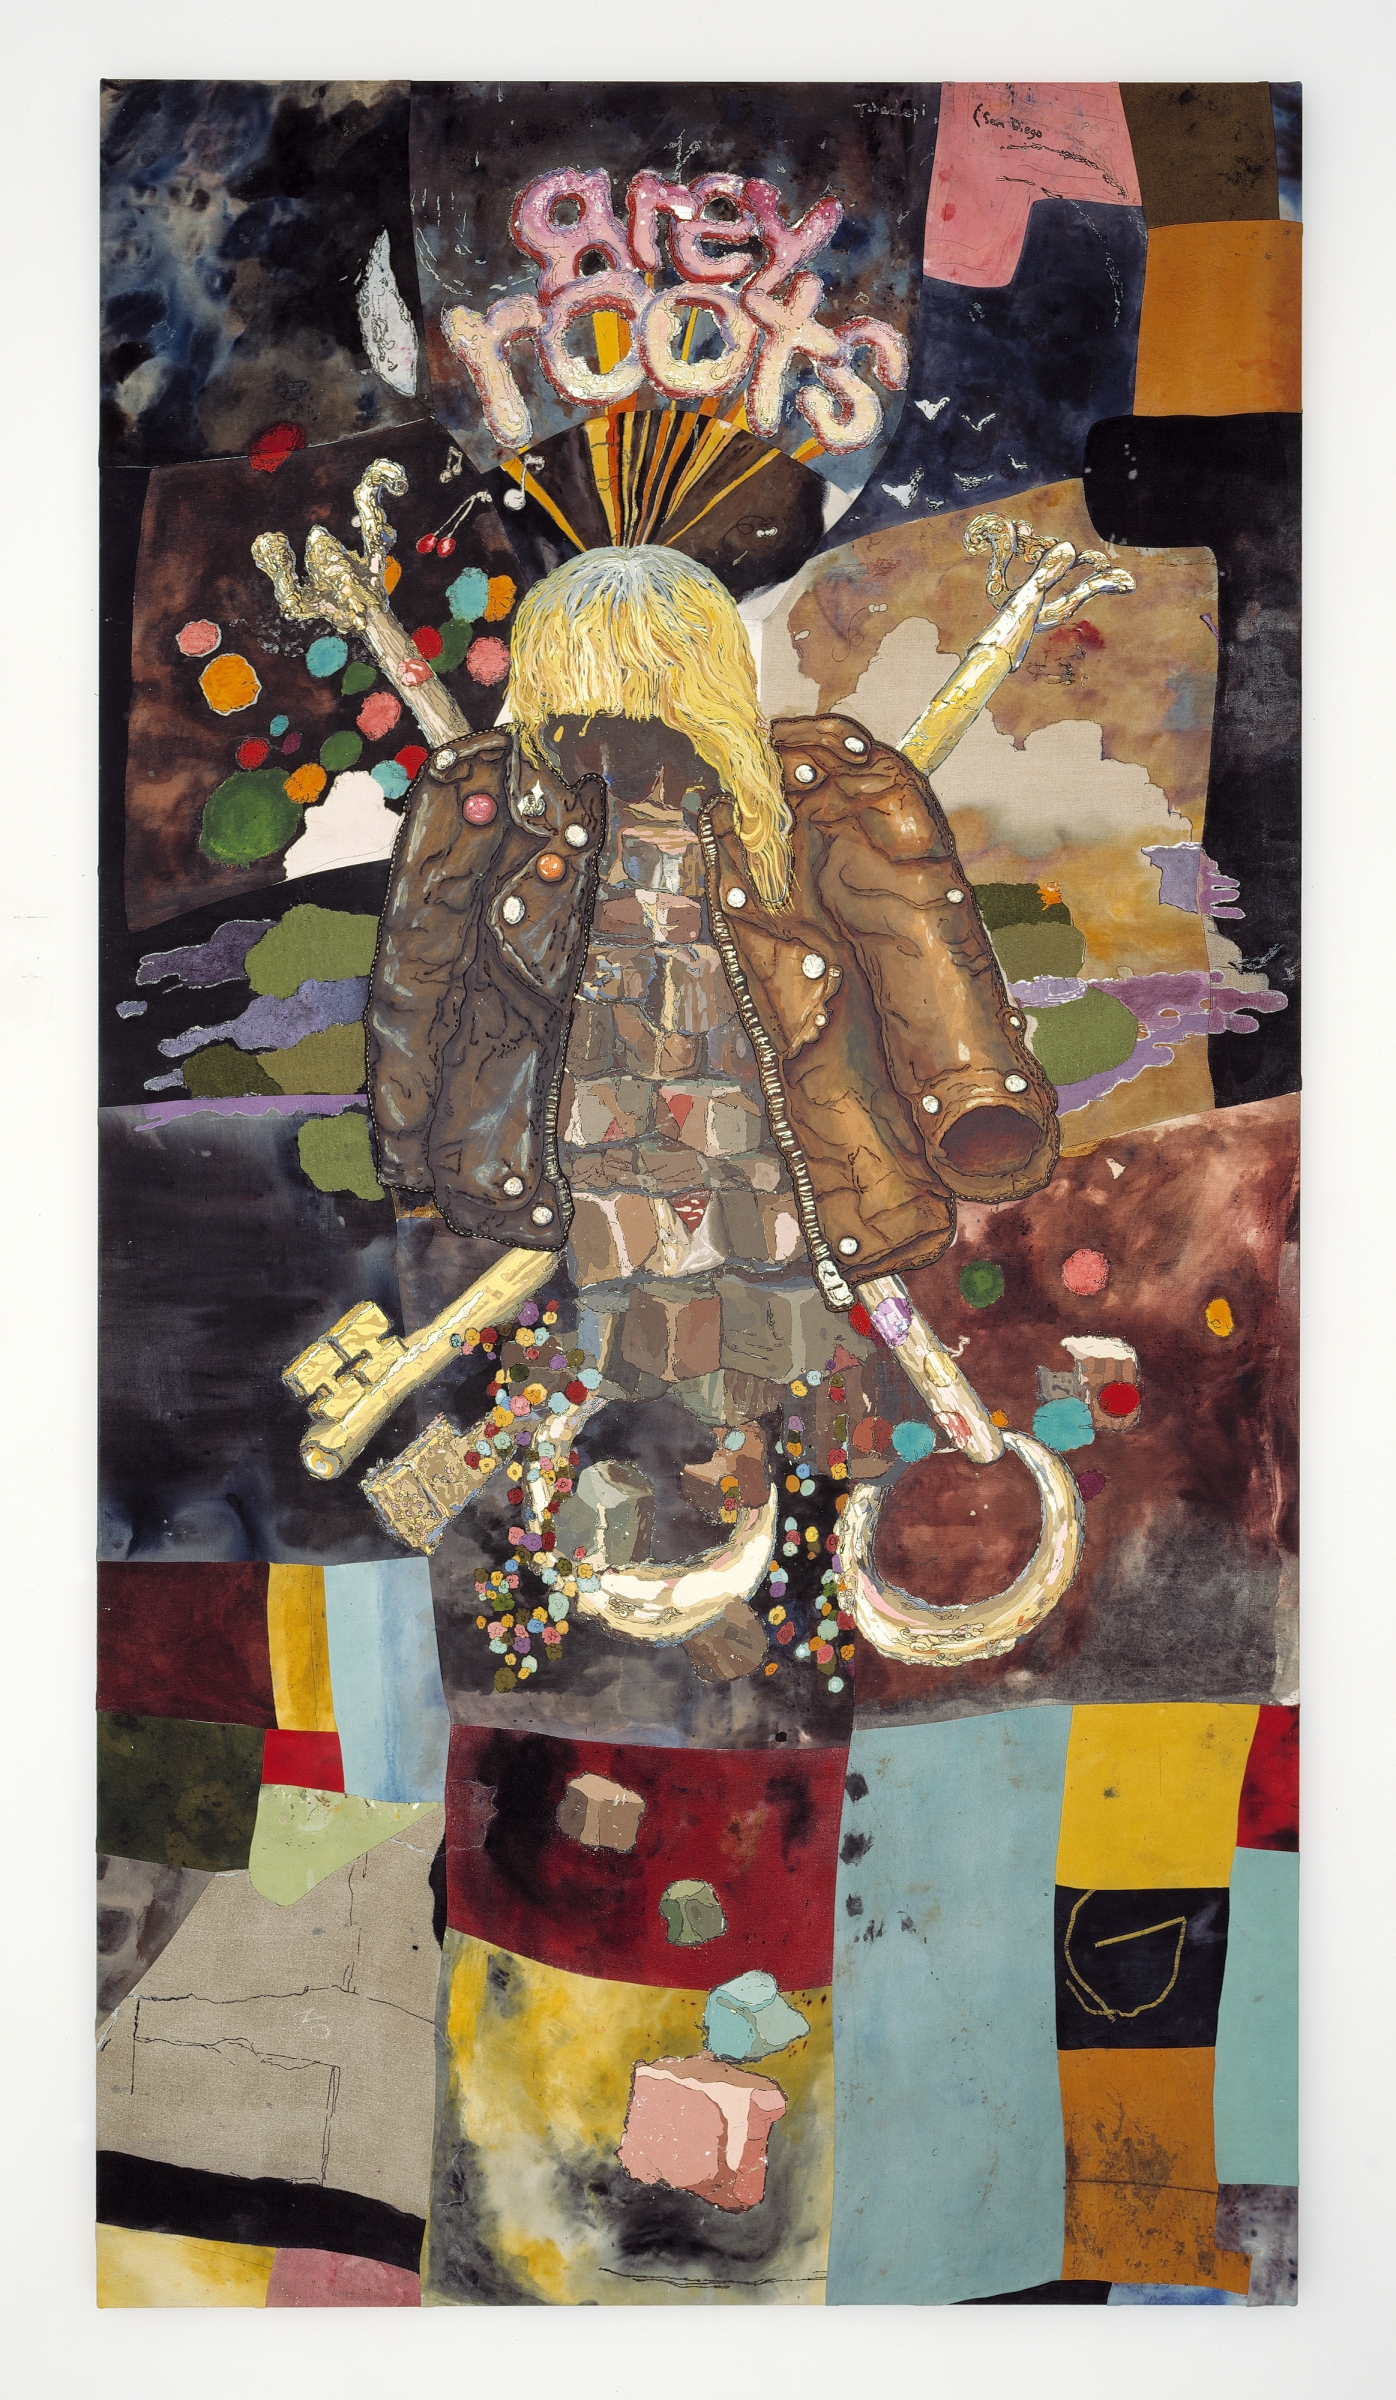 Ivan Morley
Tehachepi, (sic), 2007
oil, acrylic, dye, thread, leather, and UV varnish on canvas, cotton, and linen
115 1/2 x 62 1/2 inches
(293.4 x 158.8 cm)
Photo by Joshua White